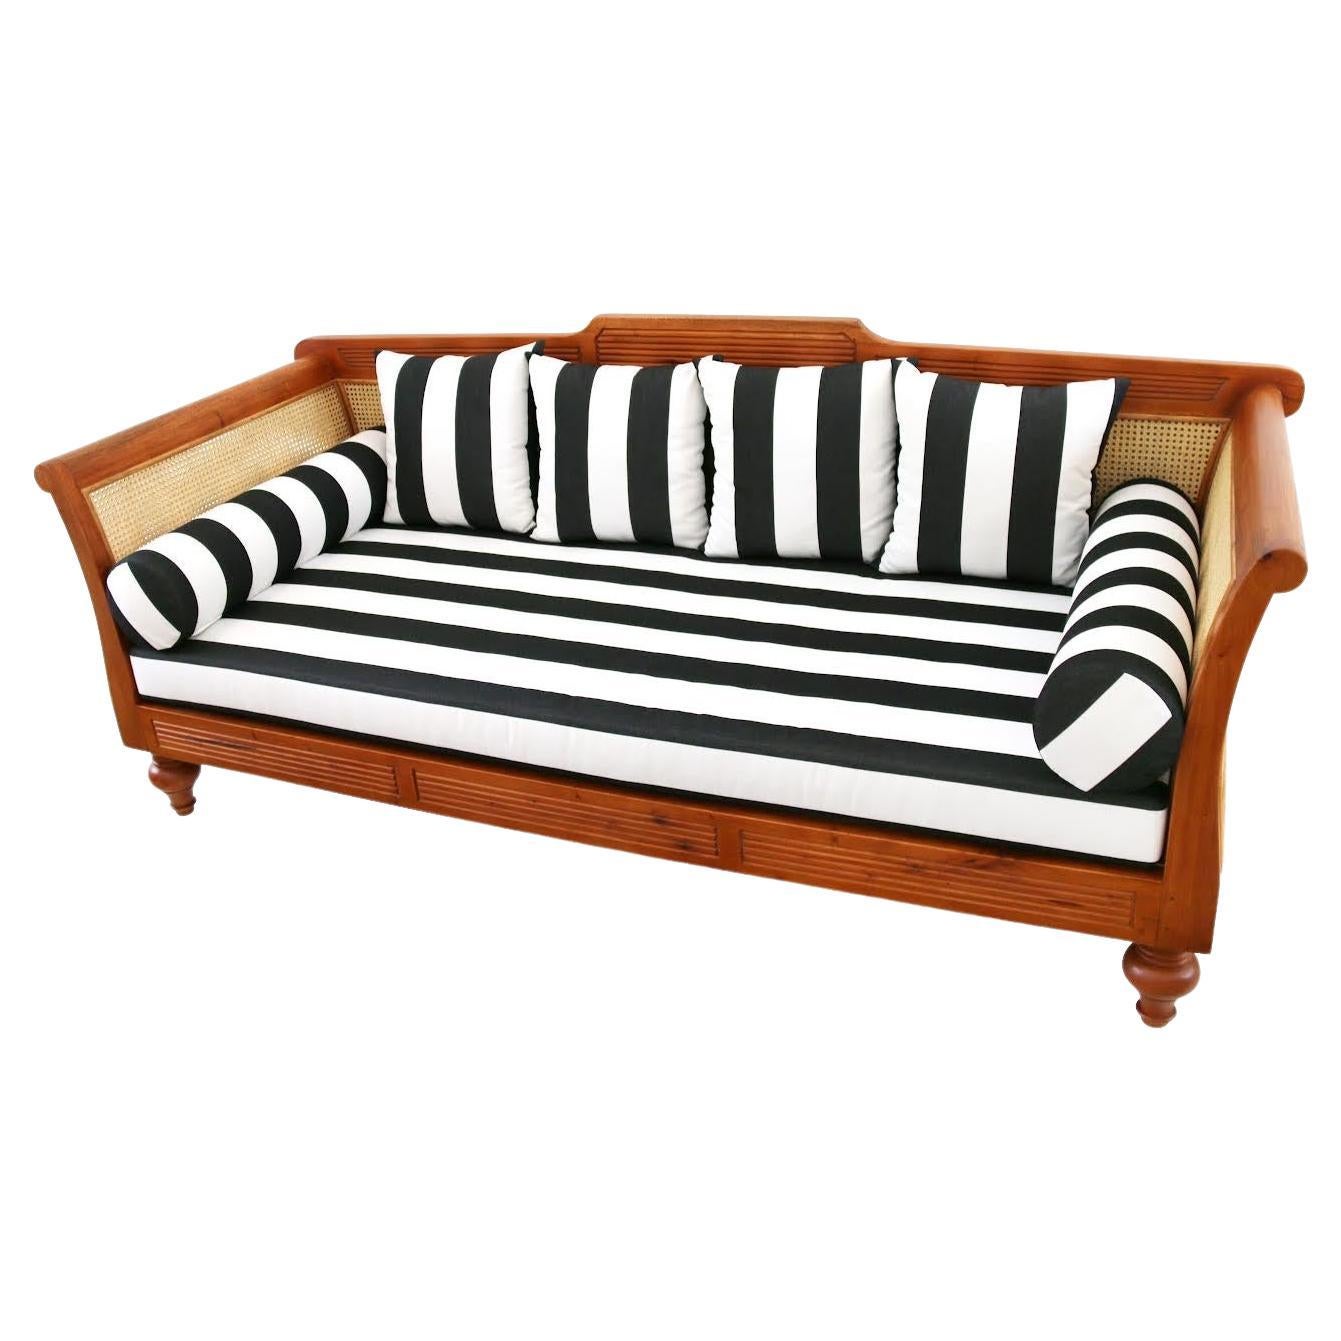 Tanjong Classic Daybed, Teak with Woven Cane and Cushion, Early Prototype For Sale